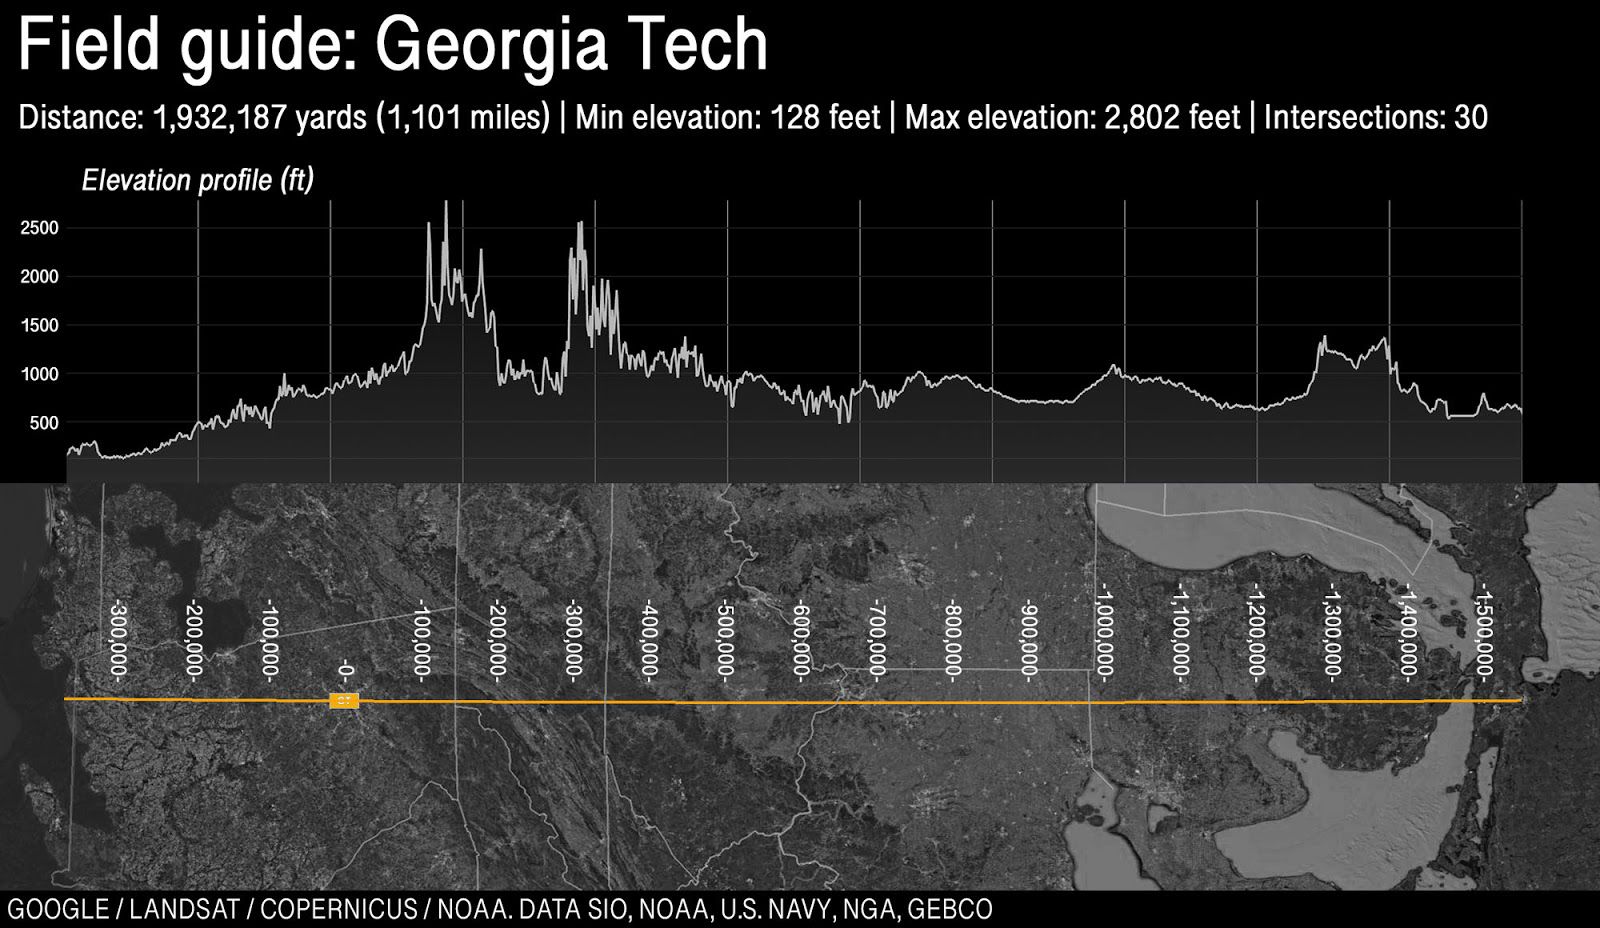 Map and elevation profile of Georgia Tech’s field, stretching across the United States.